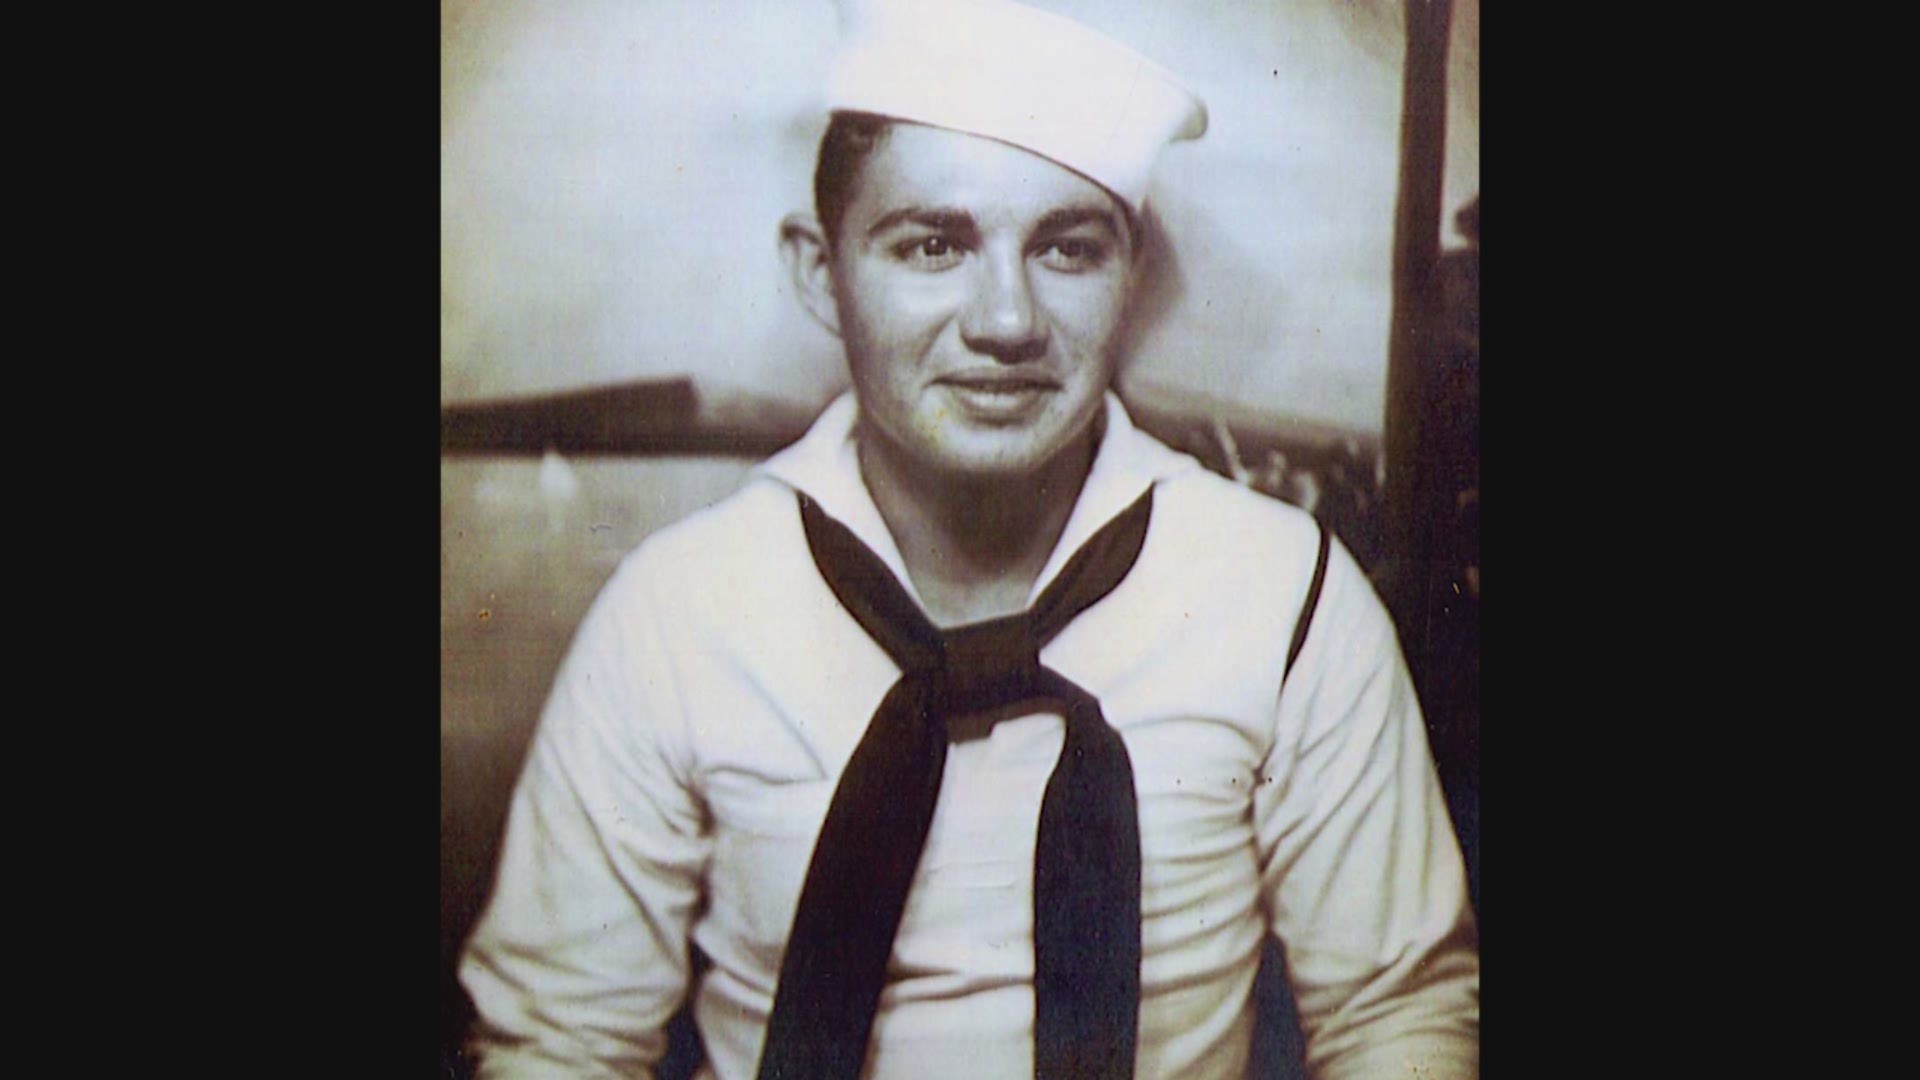 A 19-year-old left Slidell in 1940 to join the Navy. He never came home -- until now.